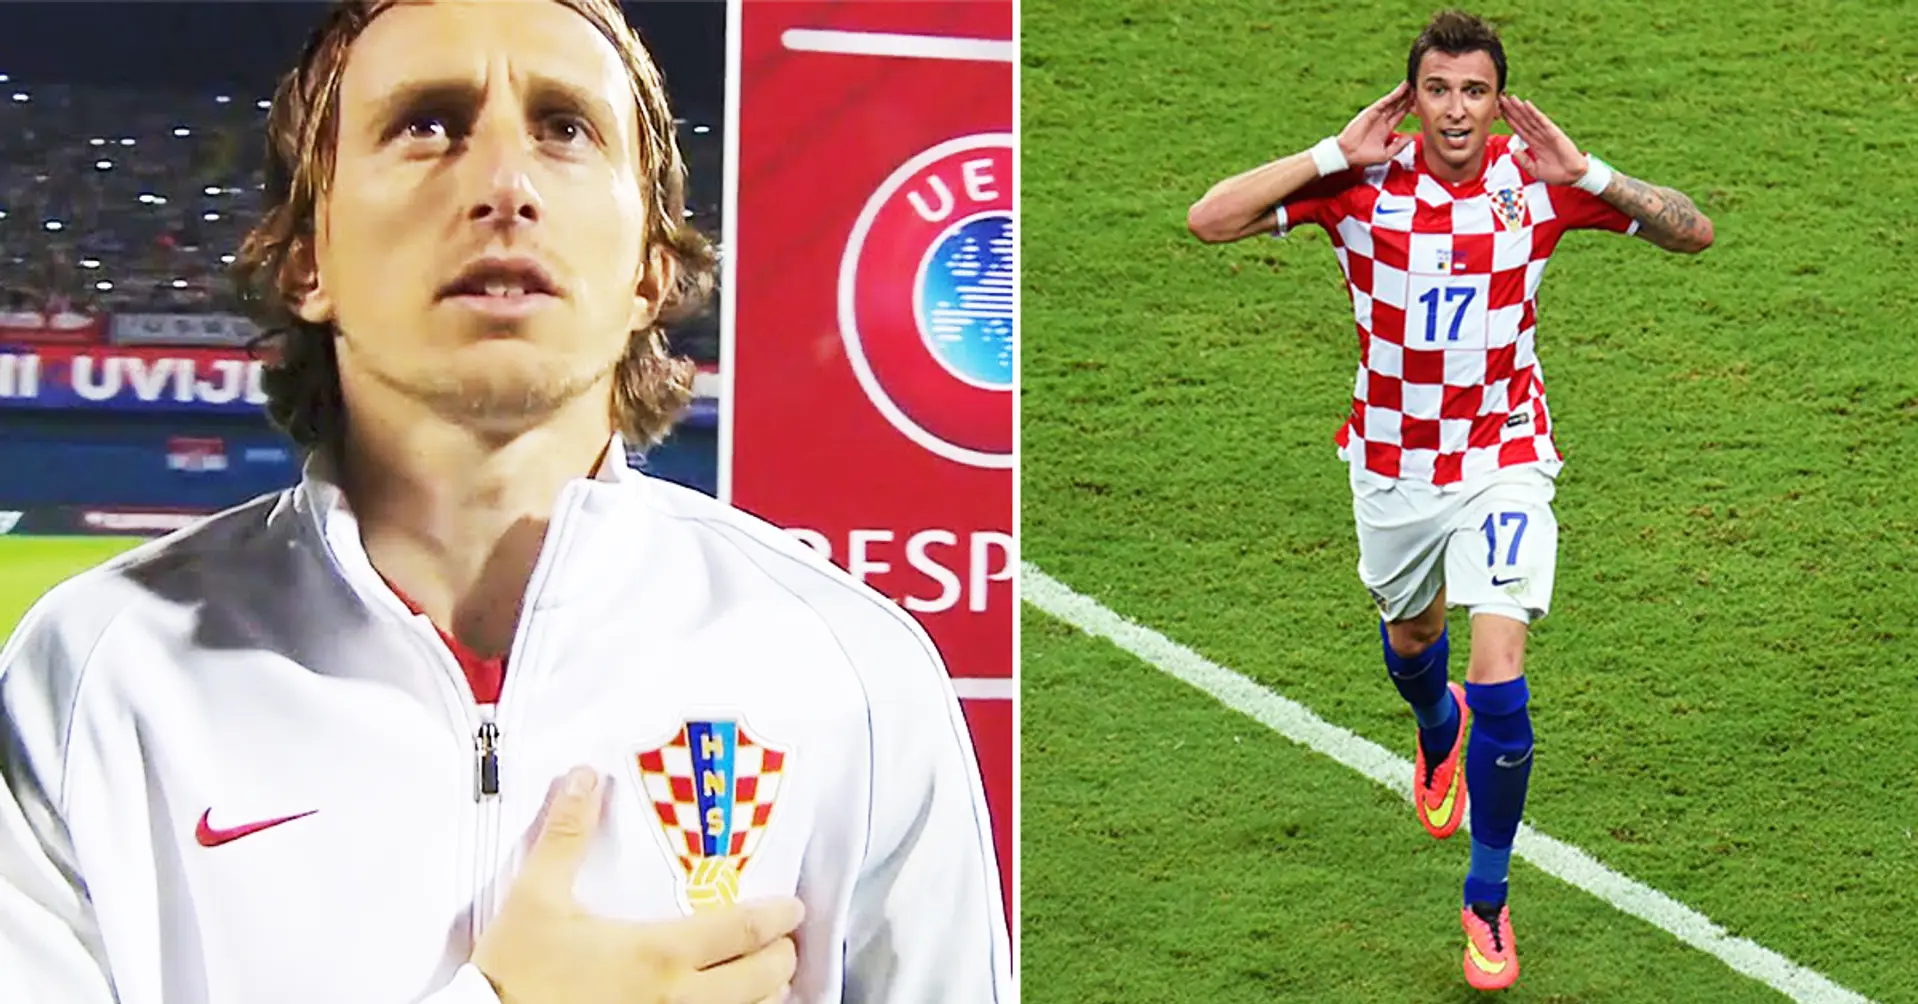 Why Luka Modric and Mario Mandzukic didn't speak for 3 years after ‘elevator incident’ – explained